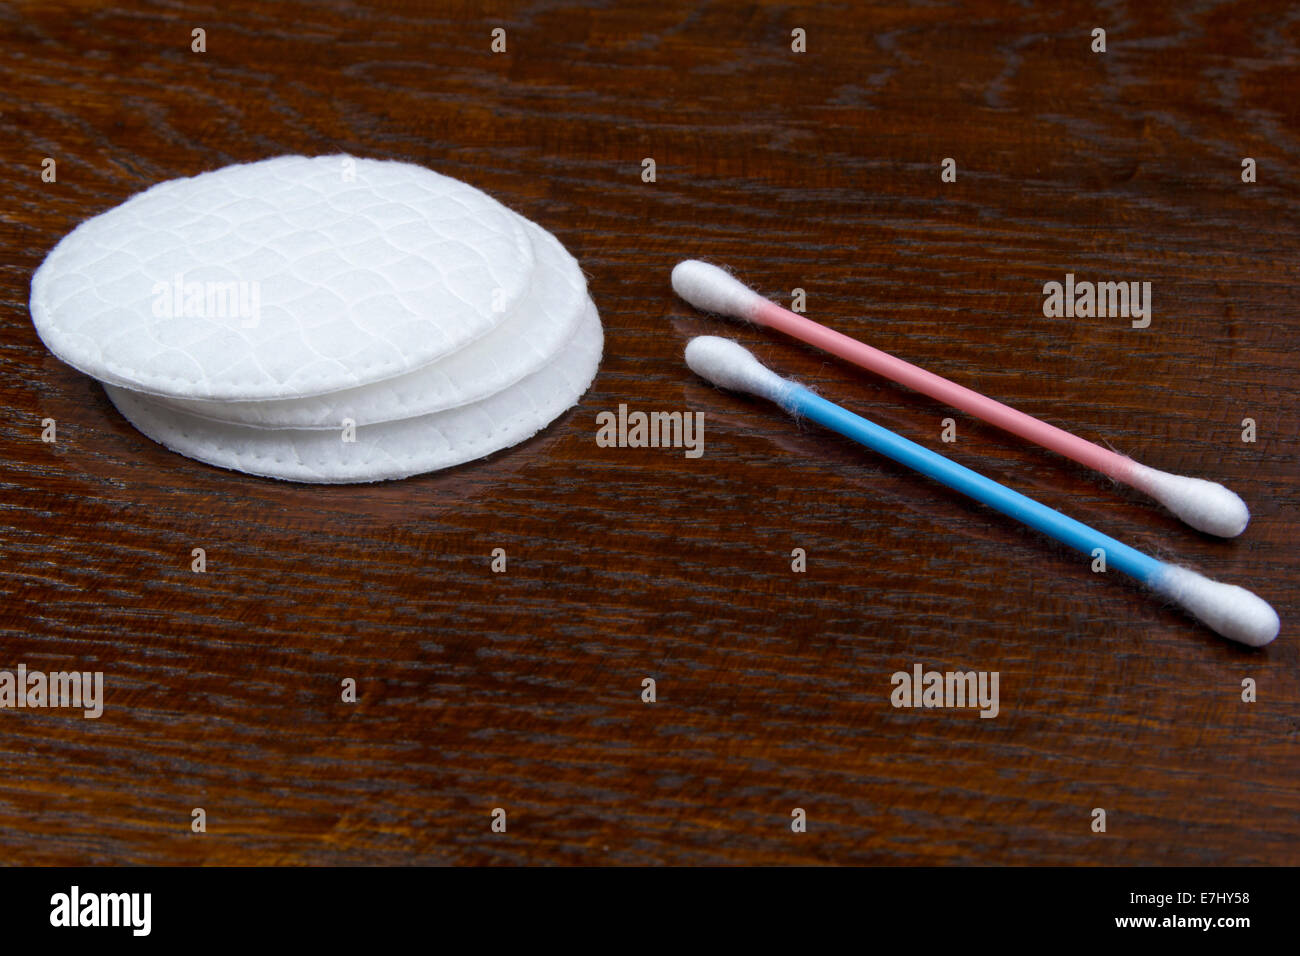 Cotton swabs and sticks on wood background Stock Photo